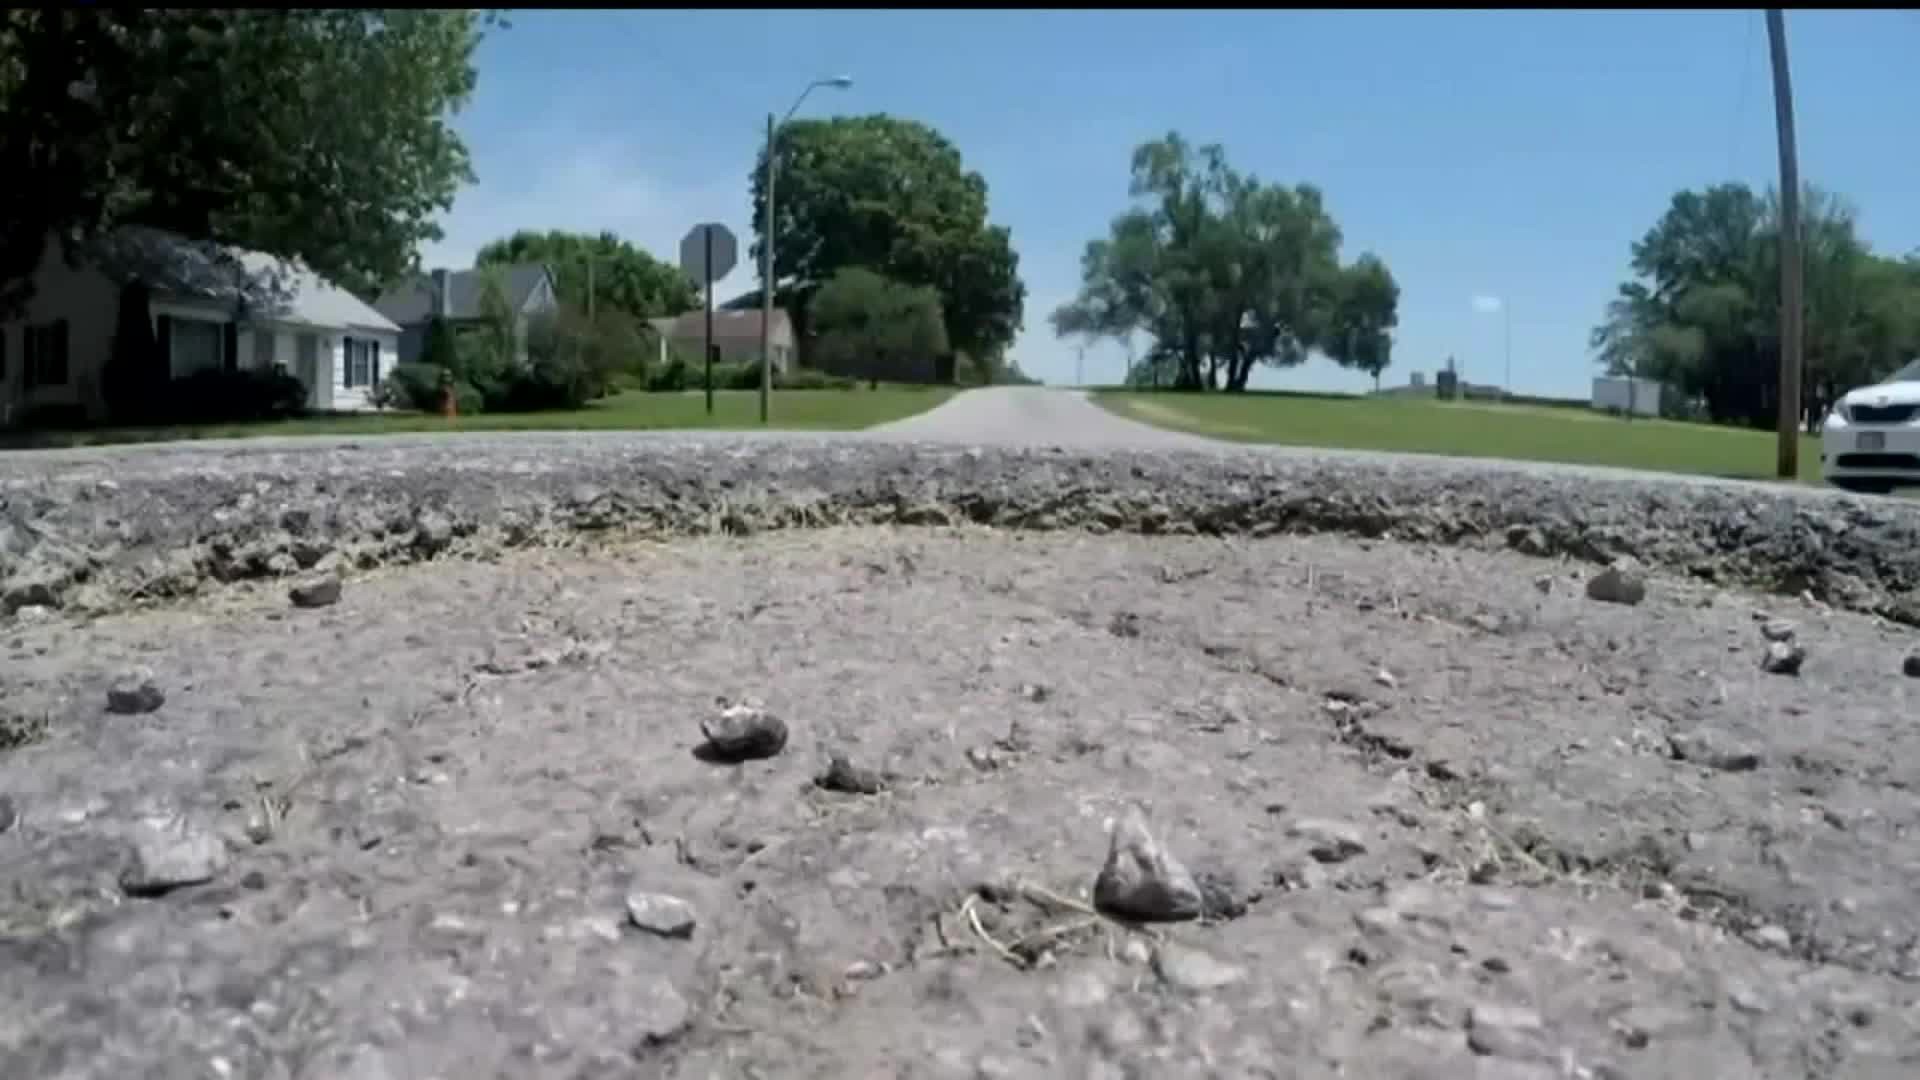 Birthday party for 3-month-old pothole